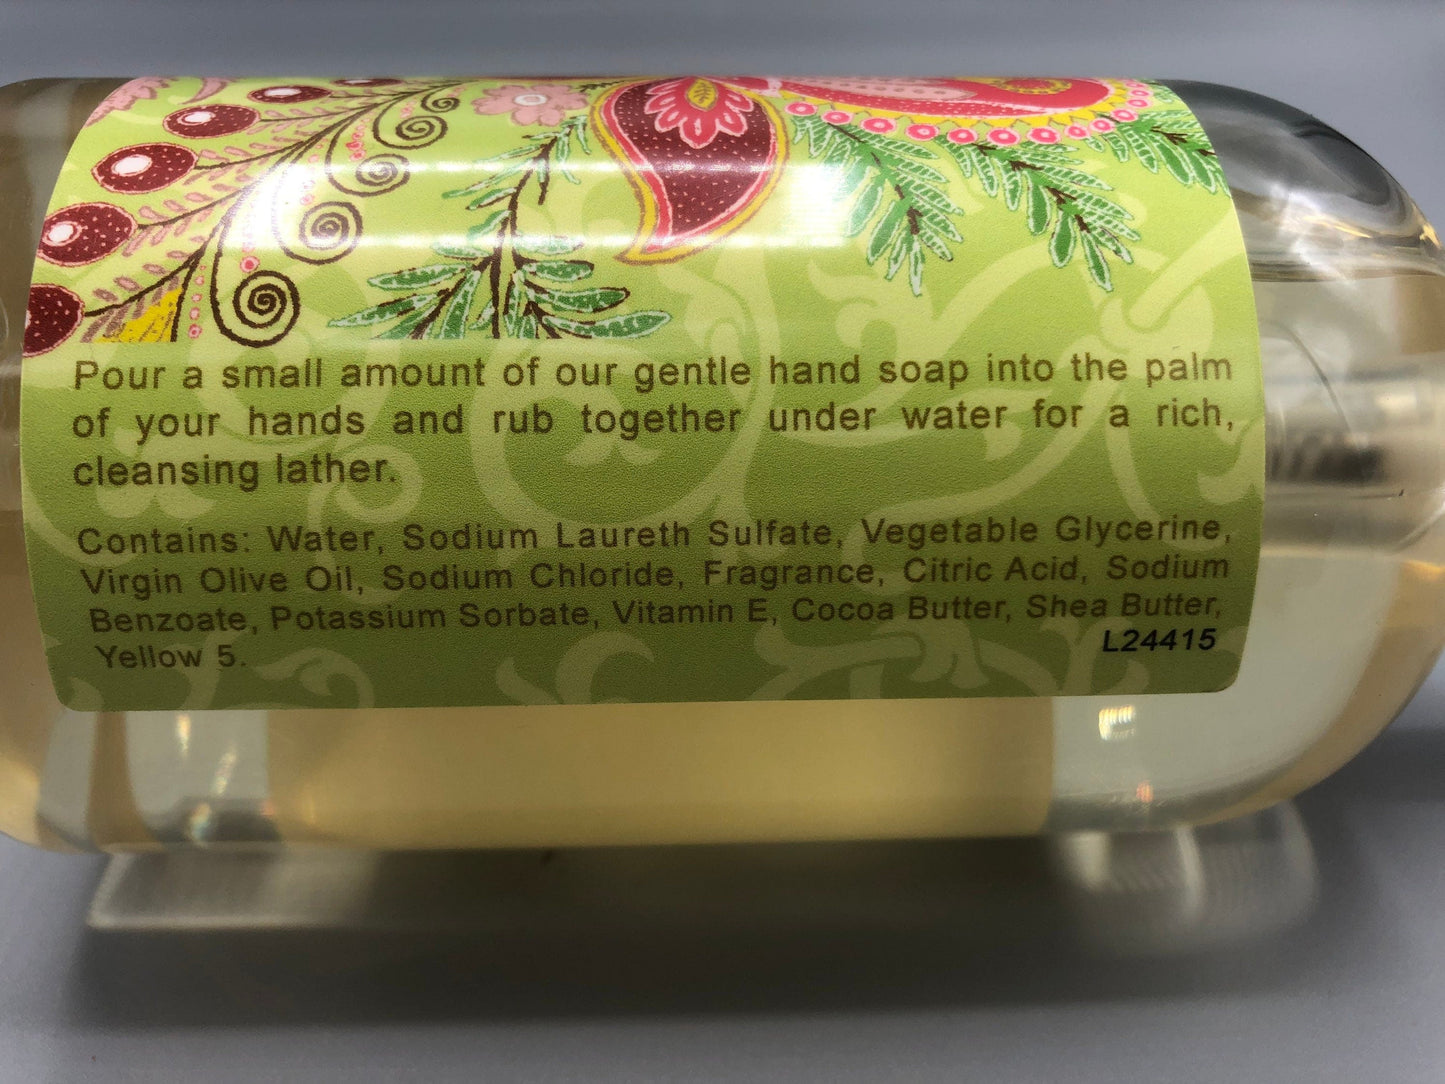 Passion Flower & Olive oil Hand Soap Lotion shea Butter 16oz